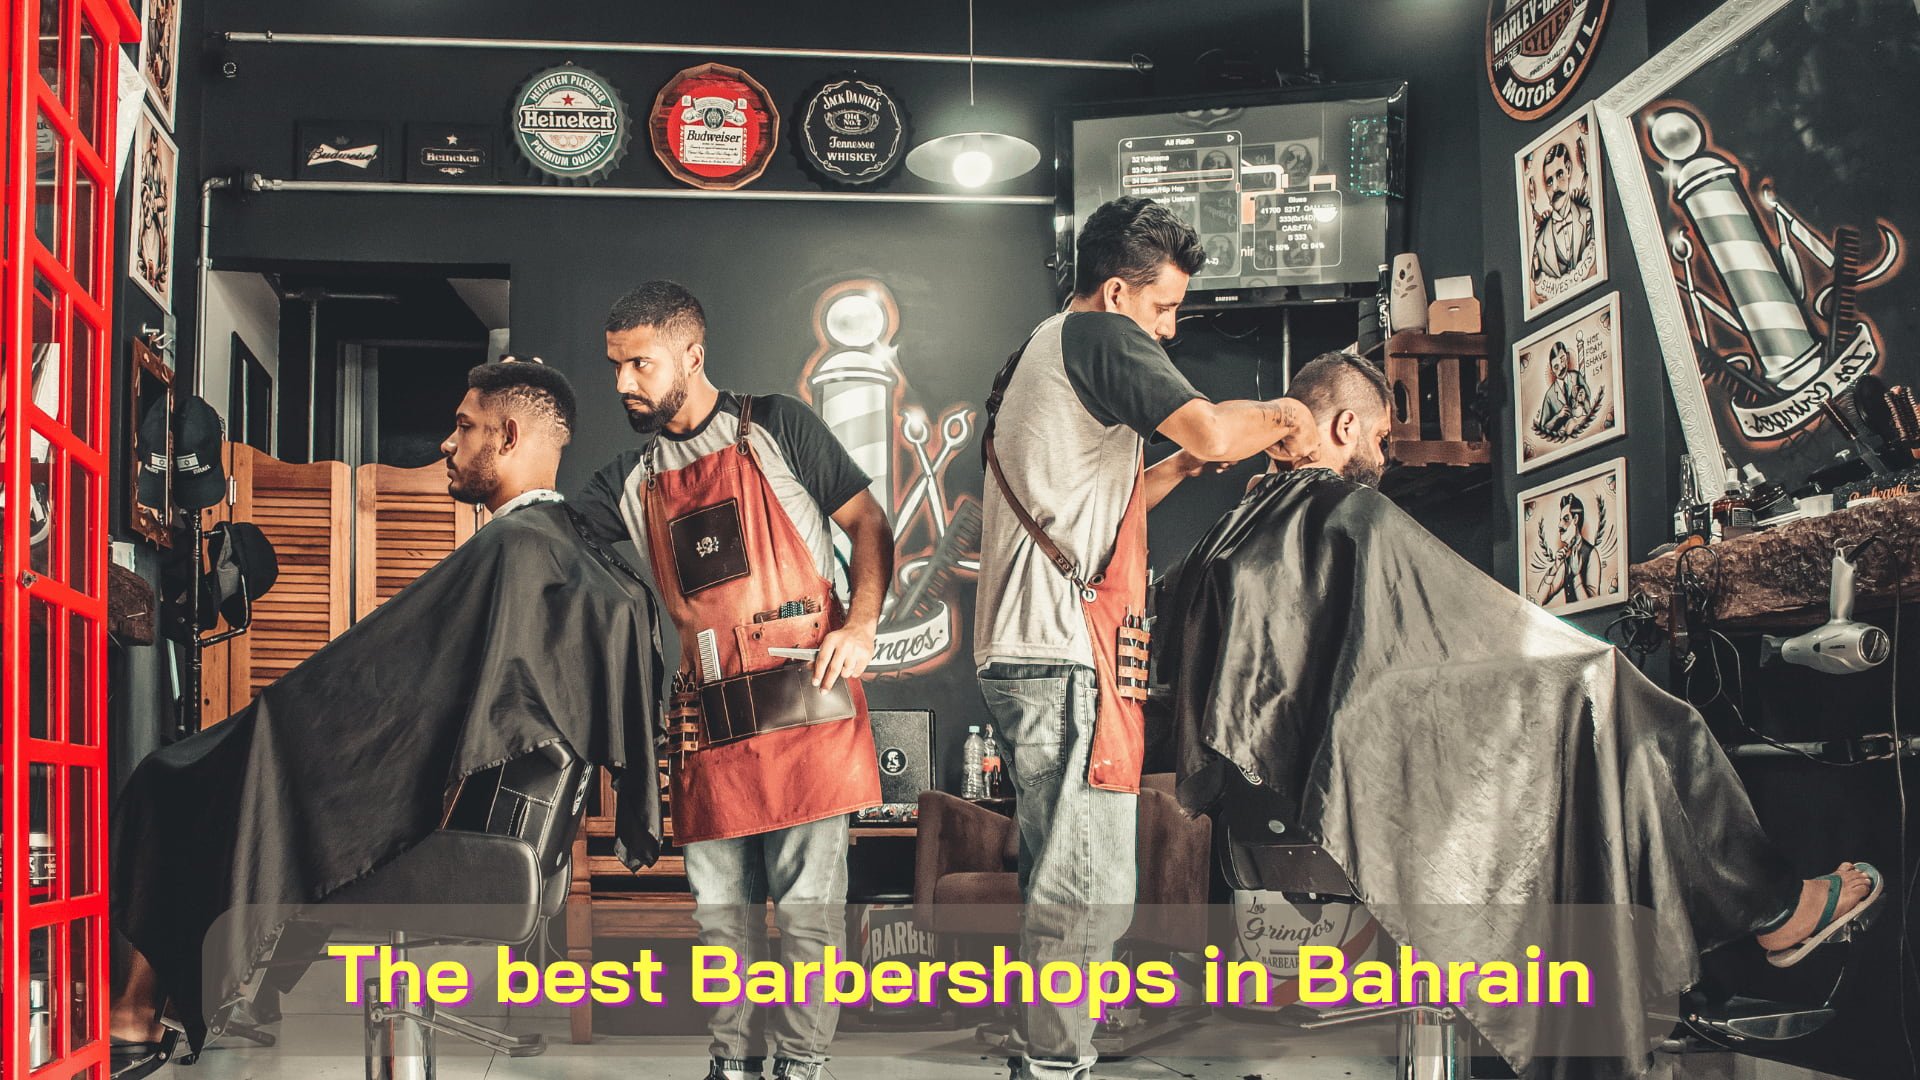 The Top 12 Barber Shops in Bahrain for a Good Looking